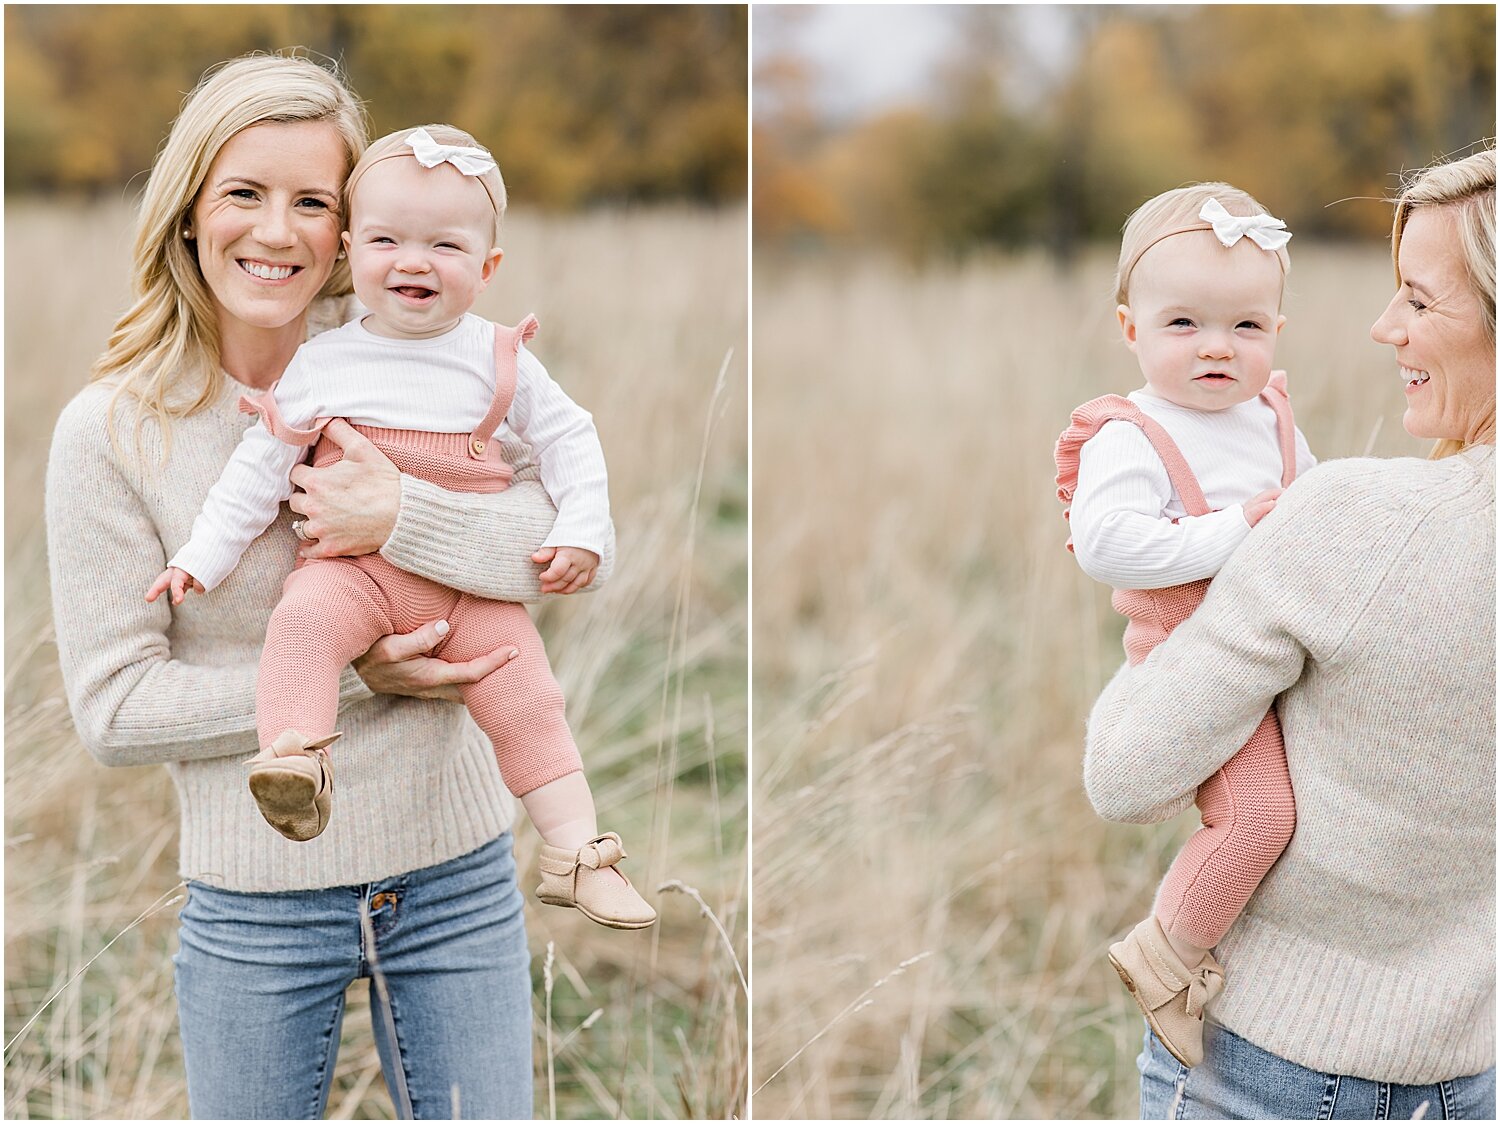 Mama and baby girl at first birthday photoshoot in New Canaan, CT. Photos by CT Family Photographer, Kristin Wood Photography.